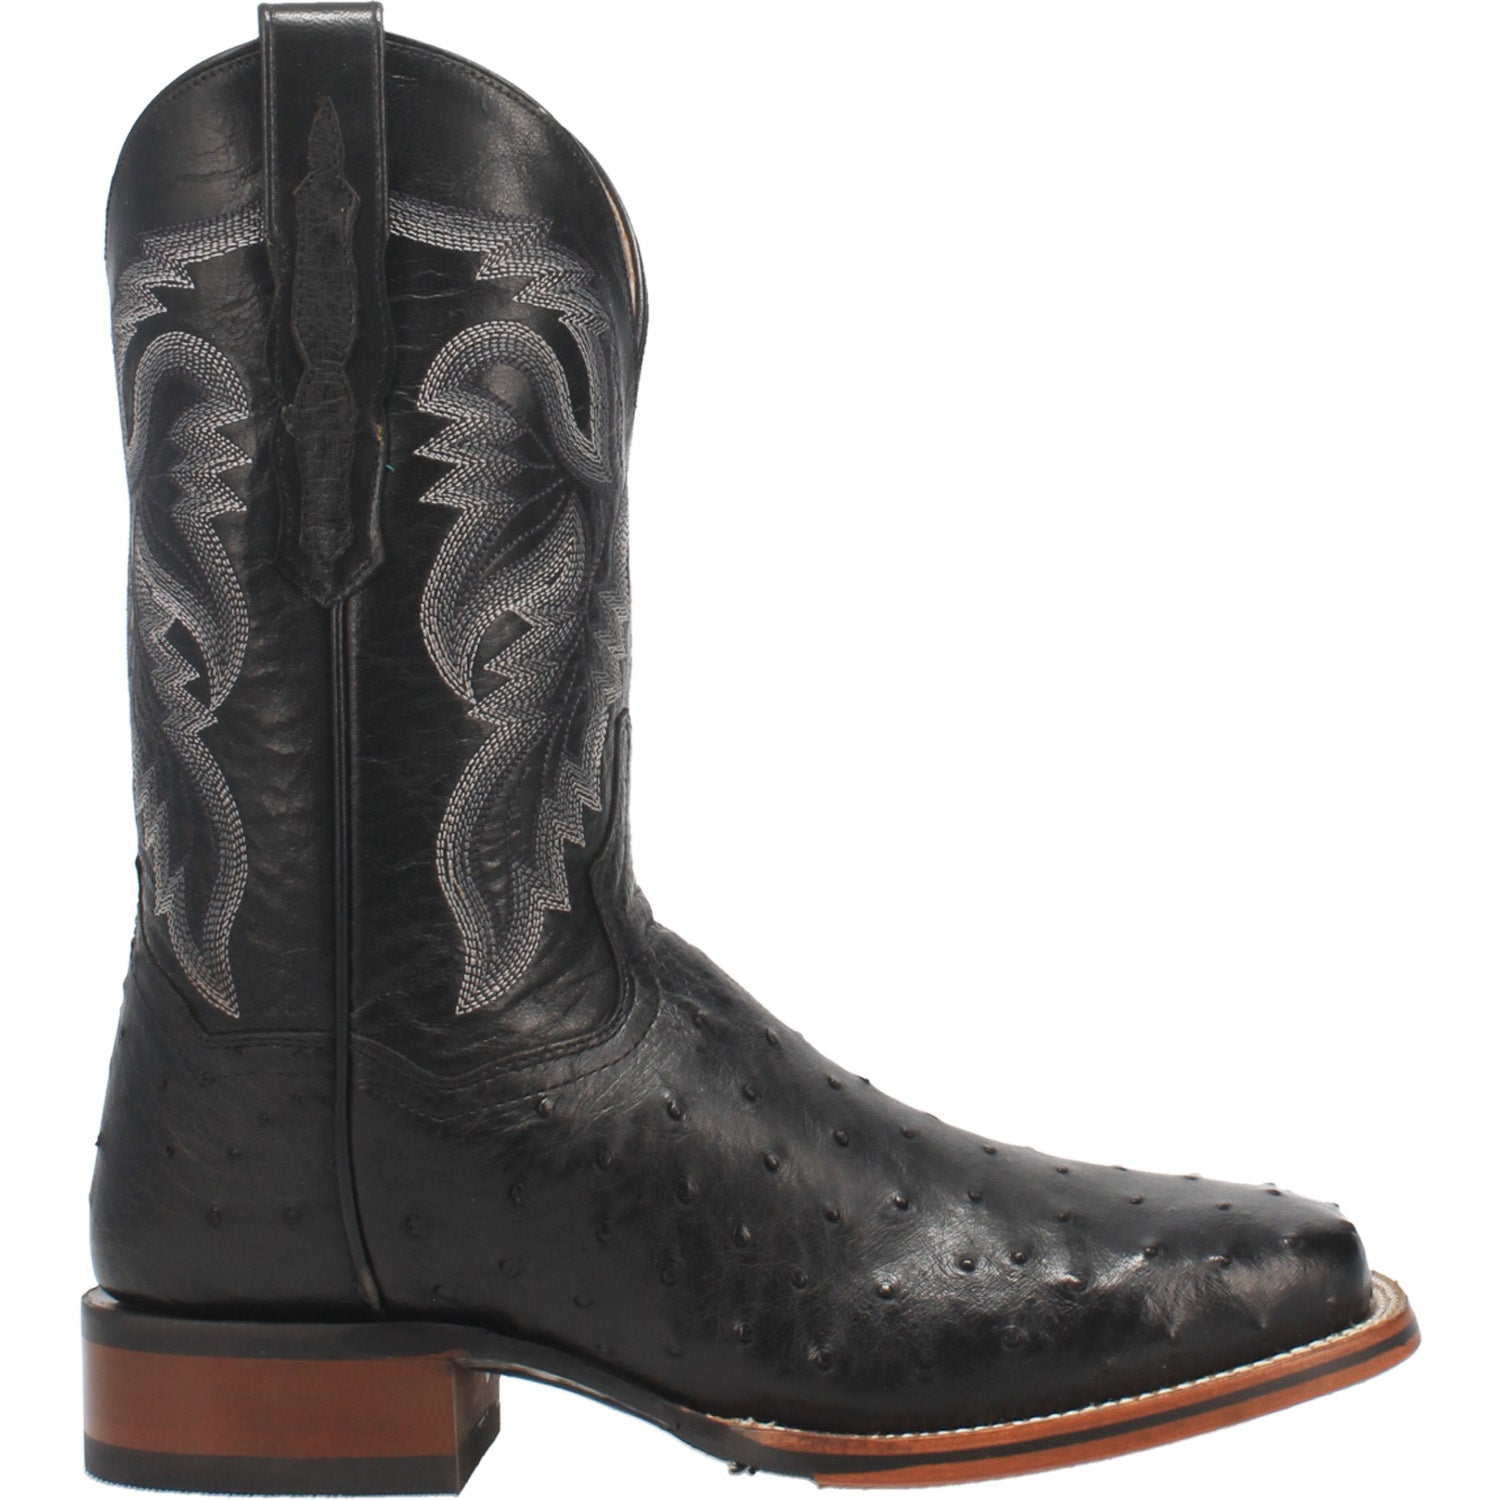 ALAMOSA FULL QUILL OSTRICH BOOT Image